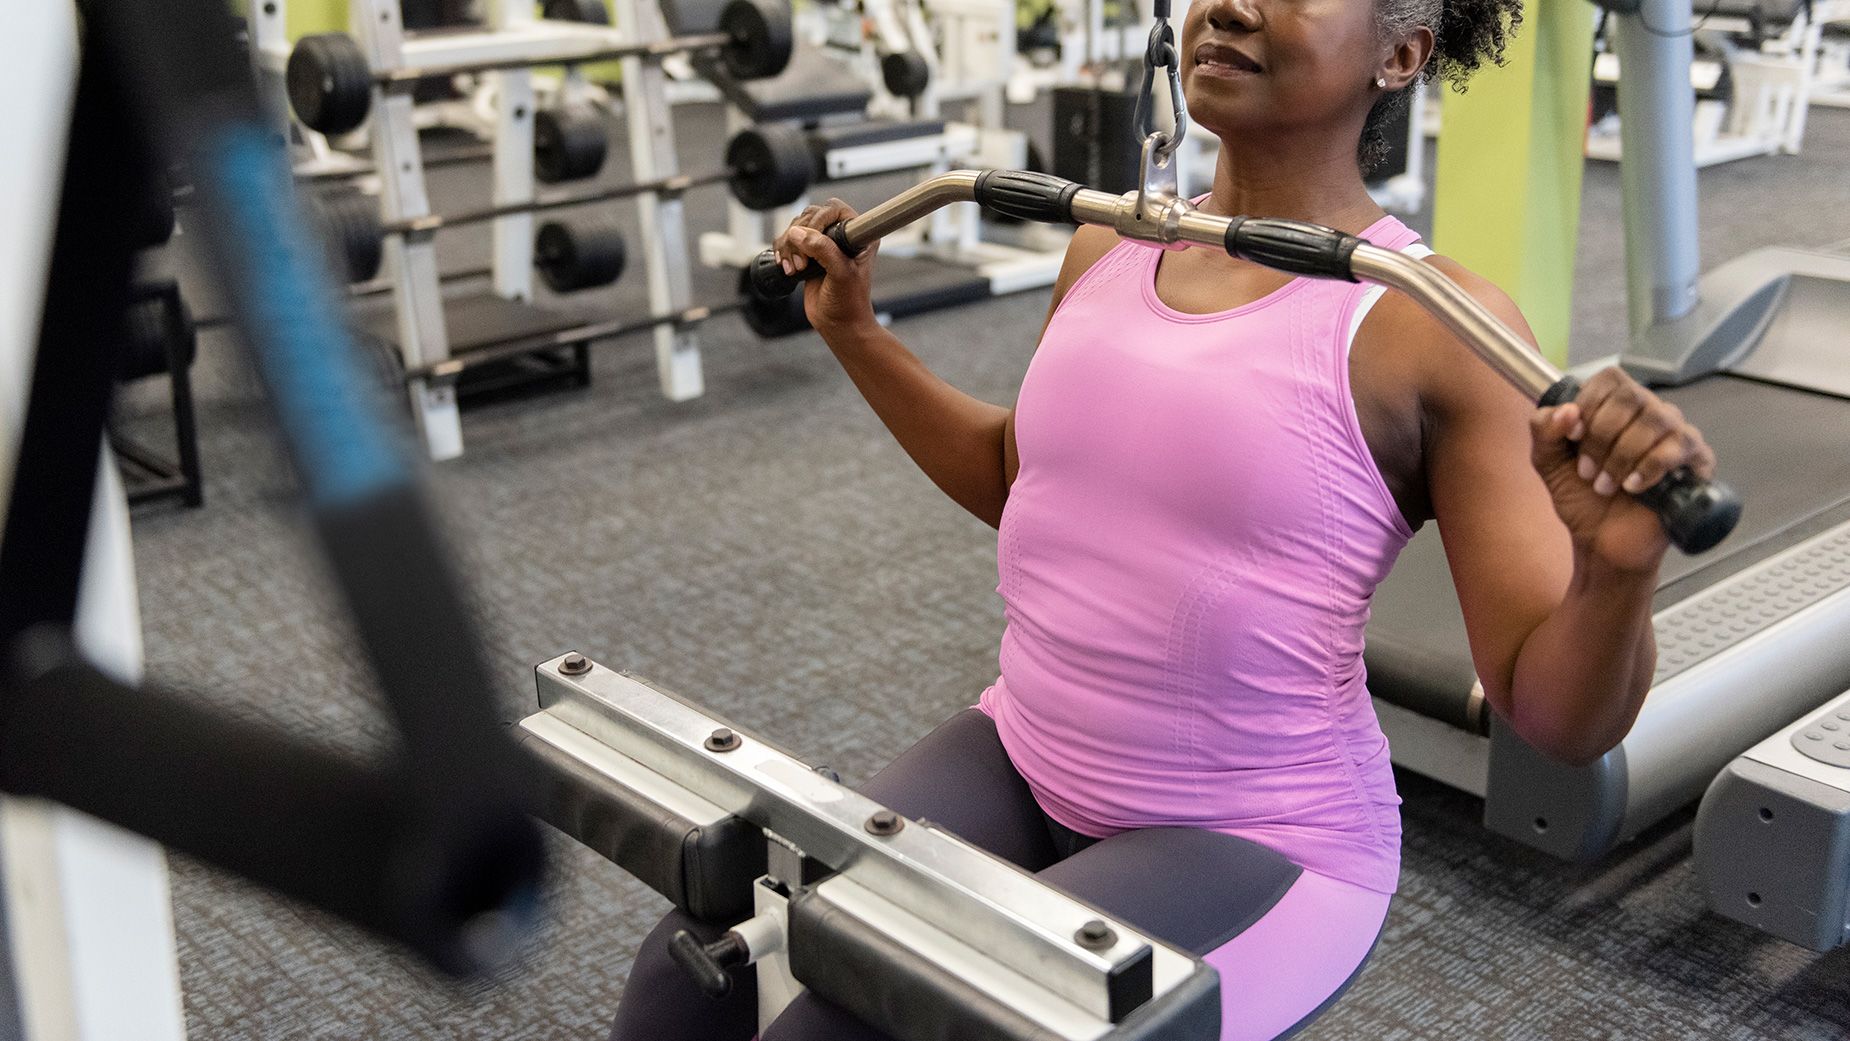 Prevent injuries by avoiding these common exercise errors